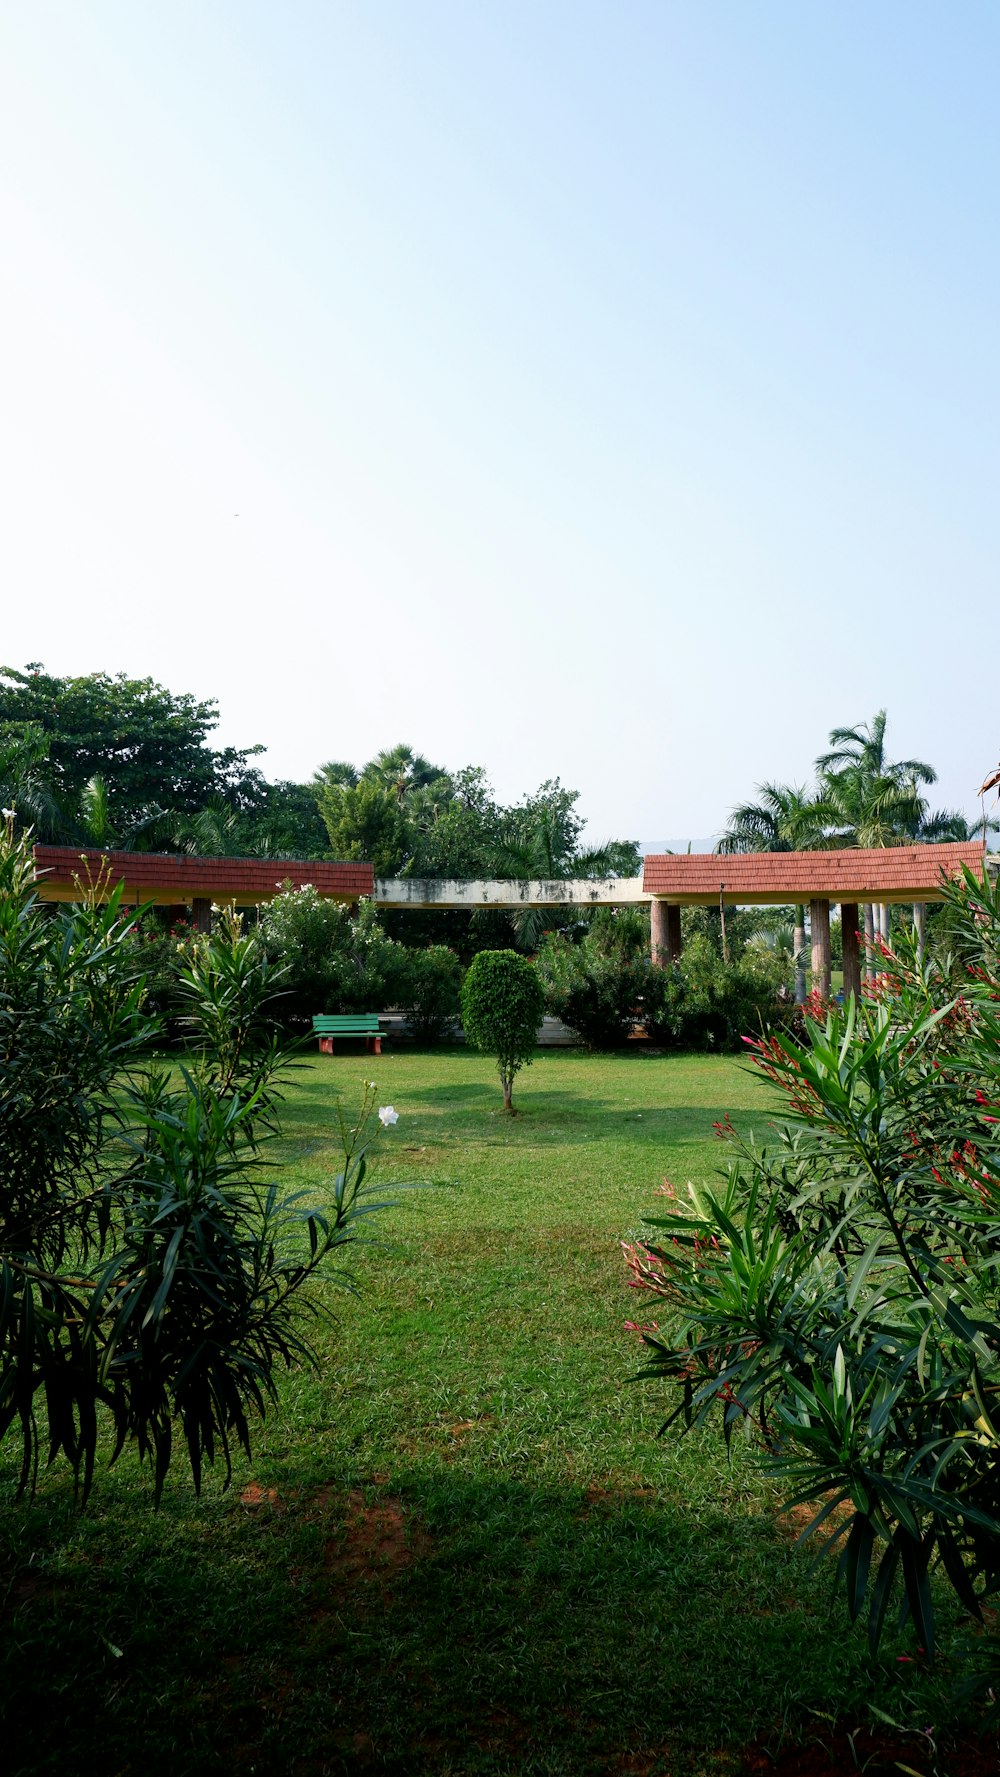 a view of a lush green yard with a bridge in the background